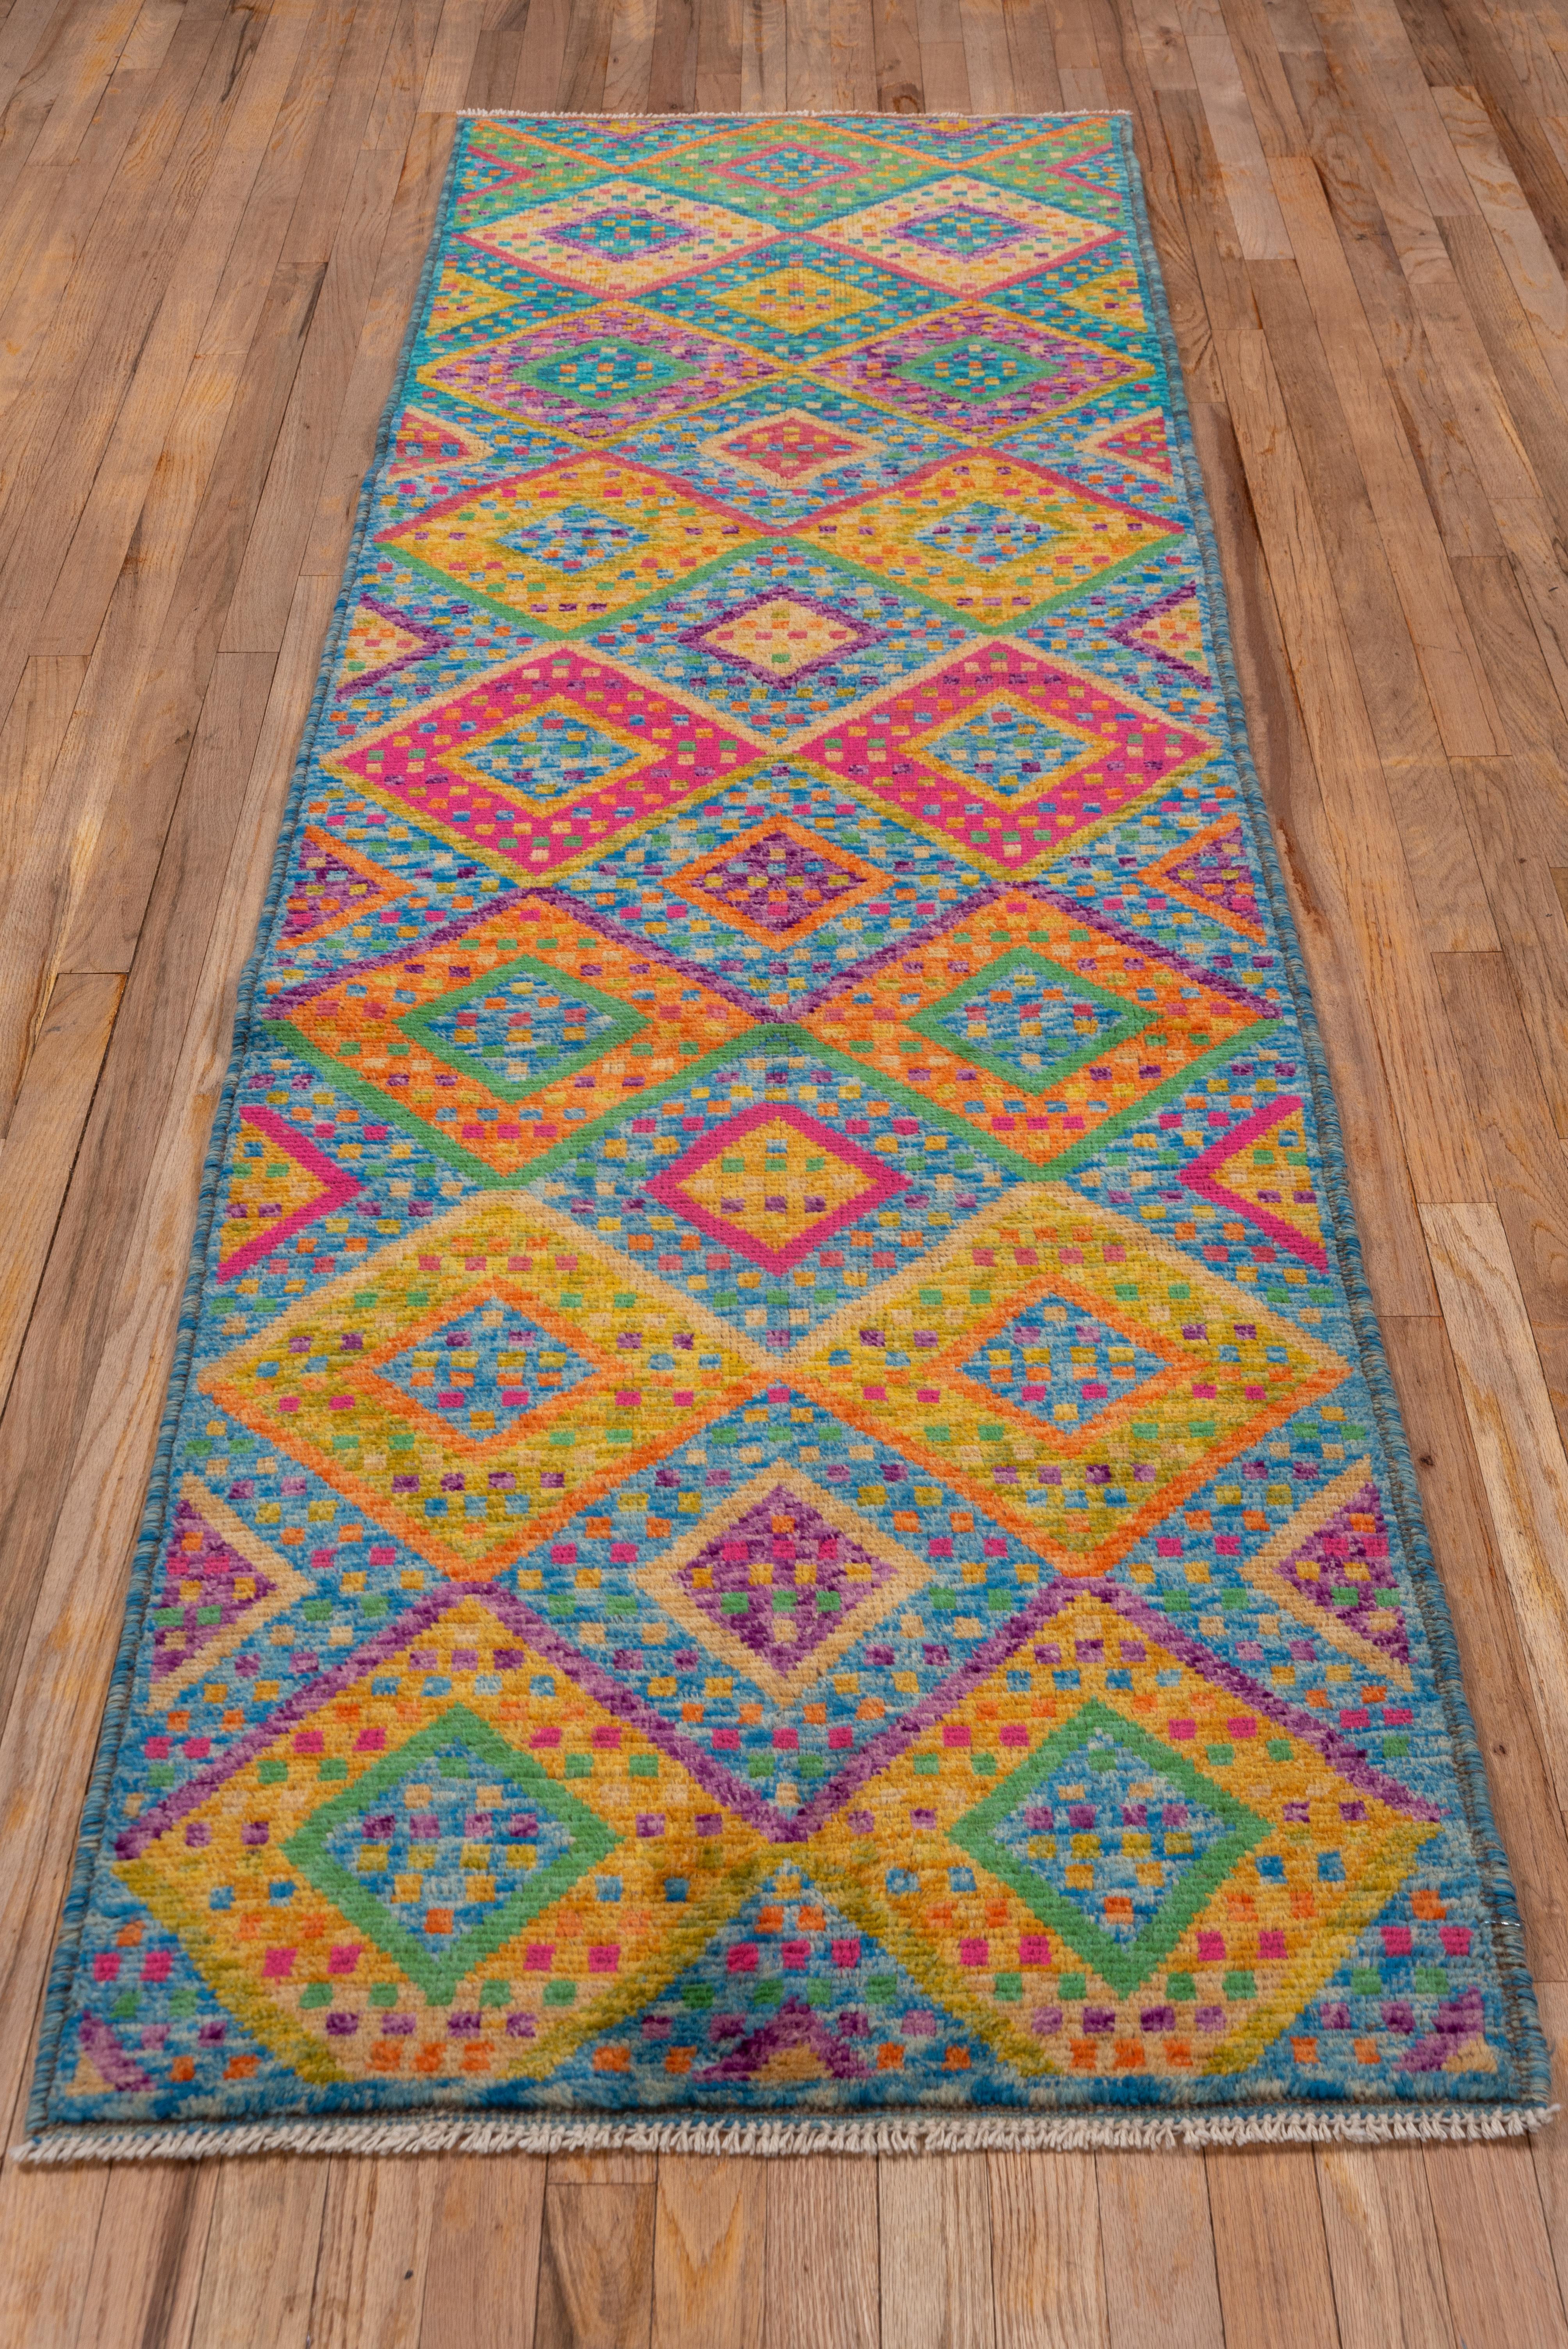 This modern runner has shades of goldenrod, marigold, aqua, royal blue, sky blue and green and are attractively broken on this abstractly patterned, borderless short runner with a two column design of nested sand internally dotted diamonds, with